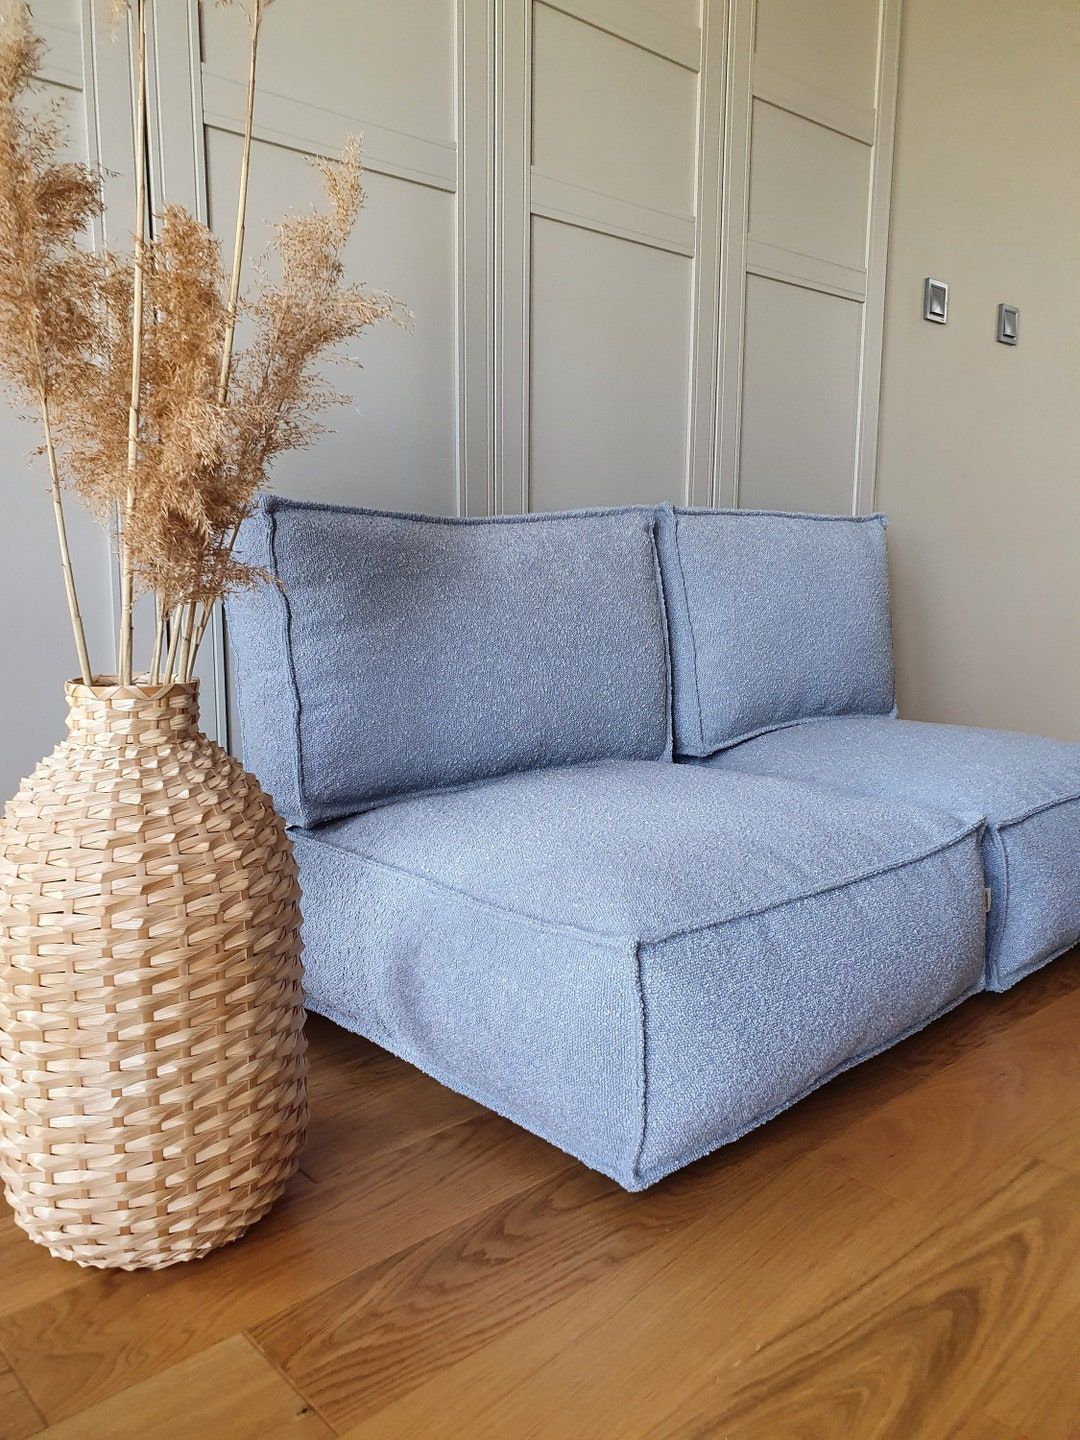 Sofa cushions for Adding Accent and Comfort to Your Sofa Set